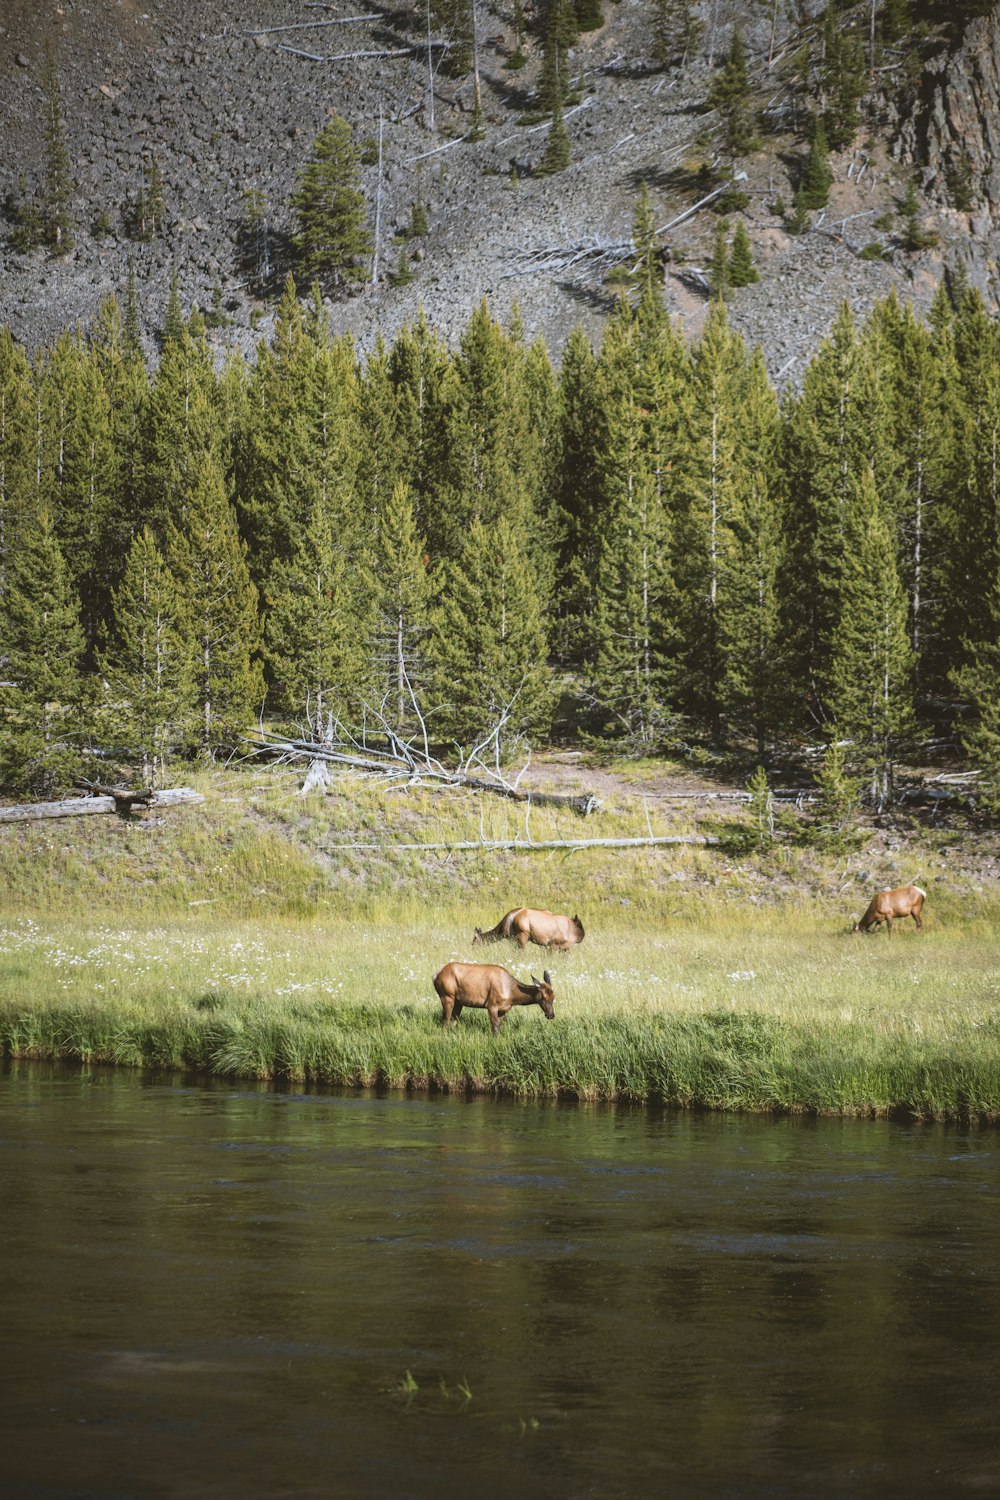 a herd of elk grazing on a lush green field next to a river